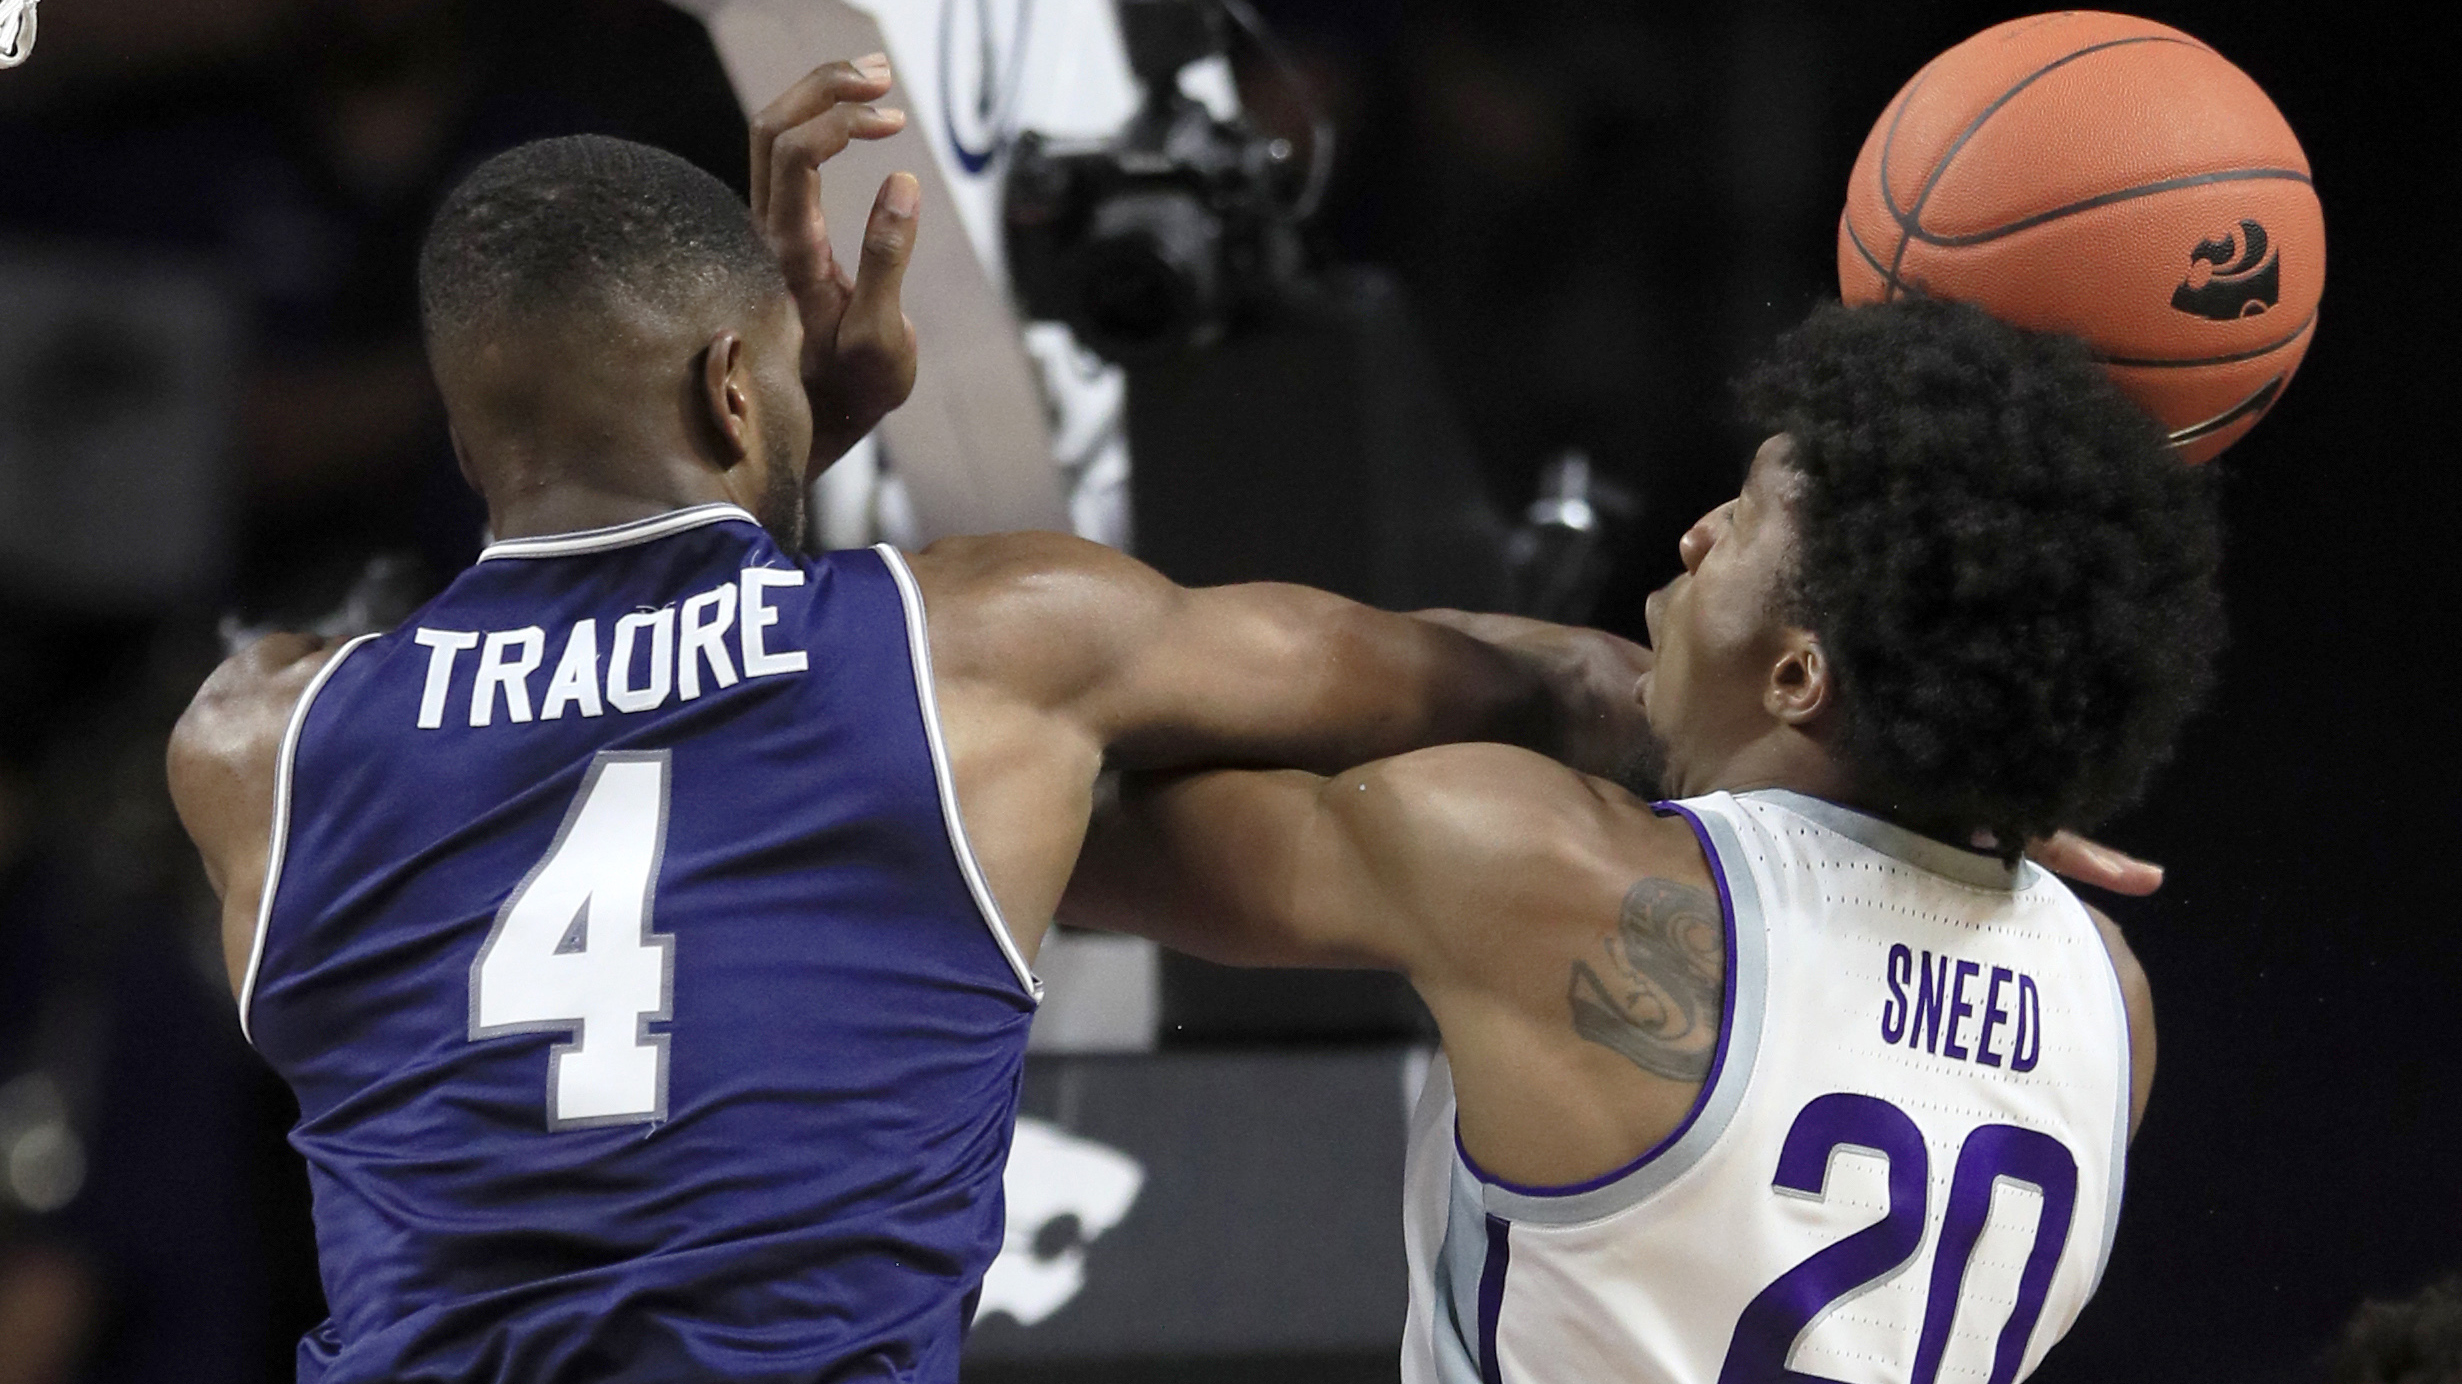 K-State coasts to 73-54 victory over Monmouth